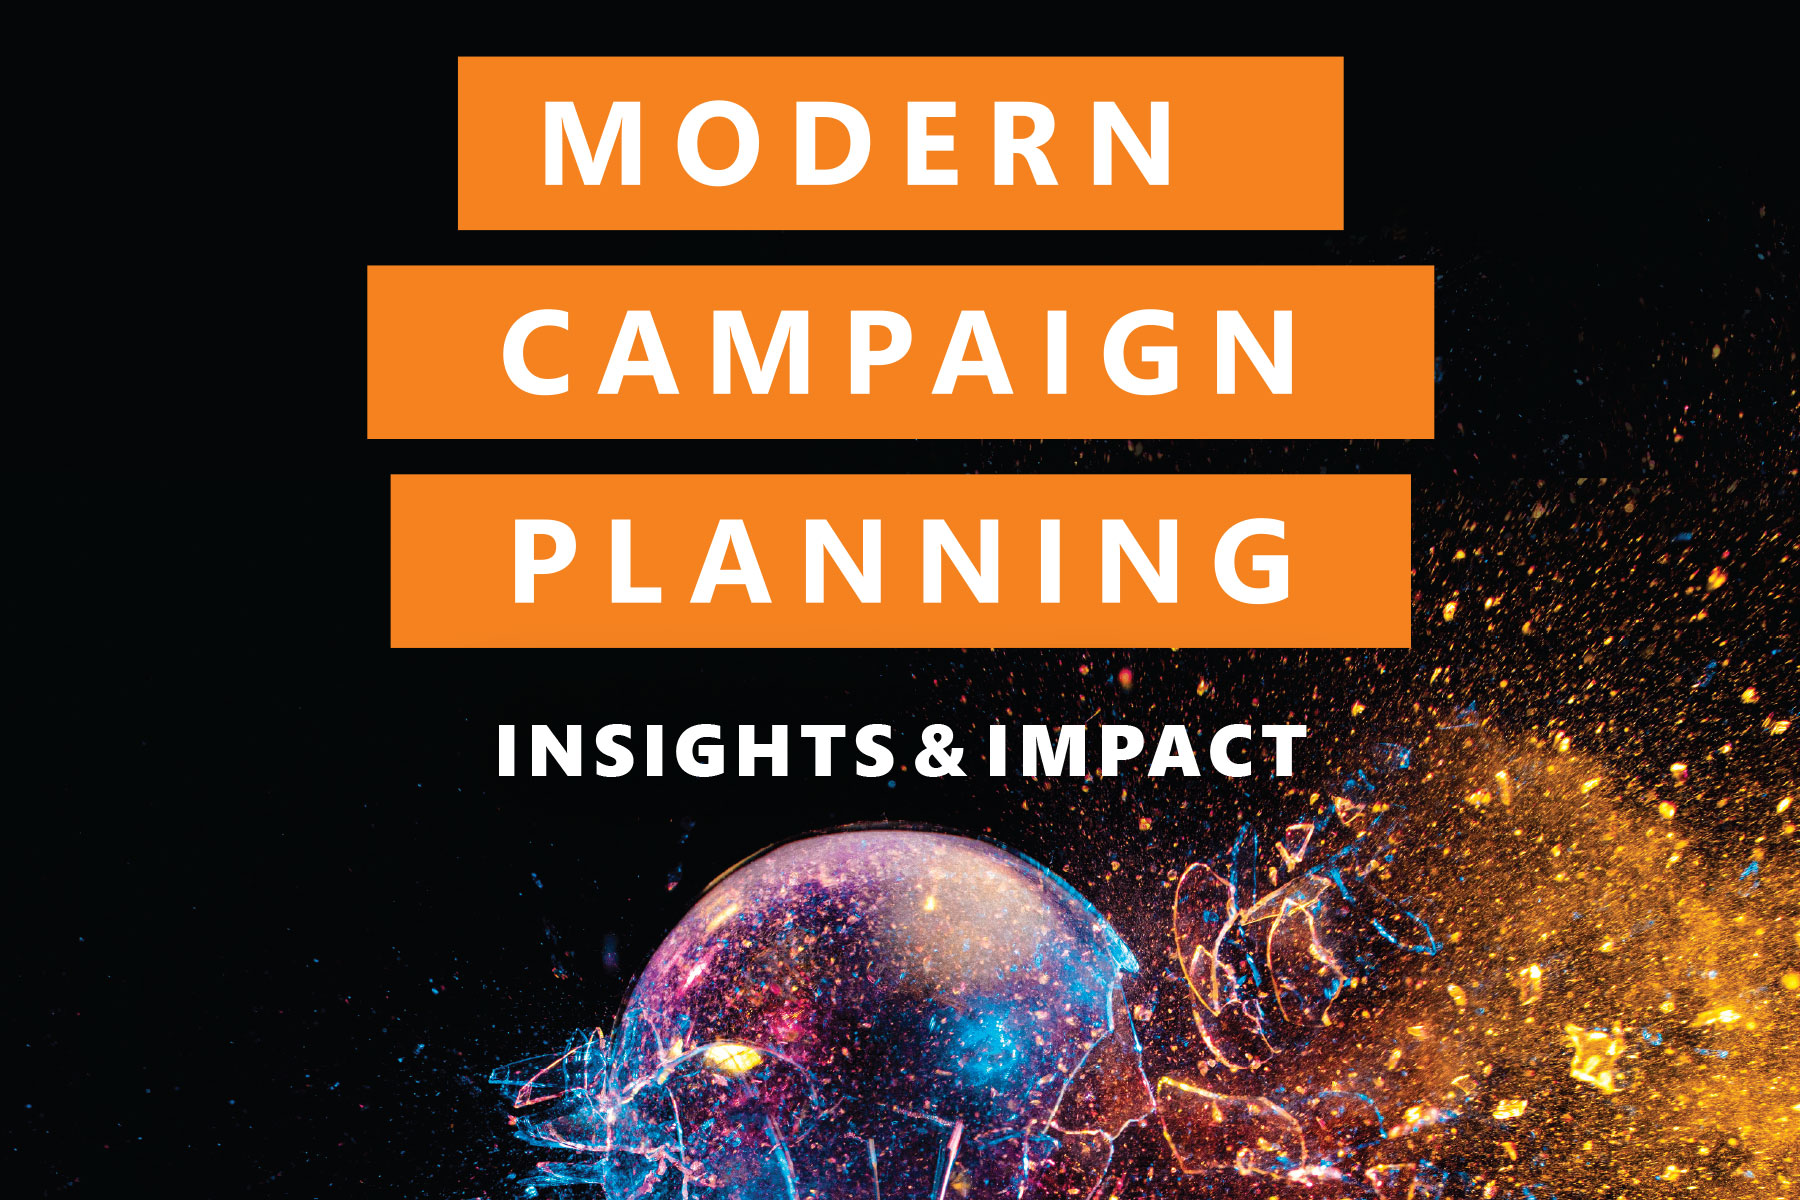 BWF Releases New Book About Modern Campaign Planning